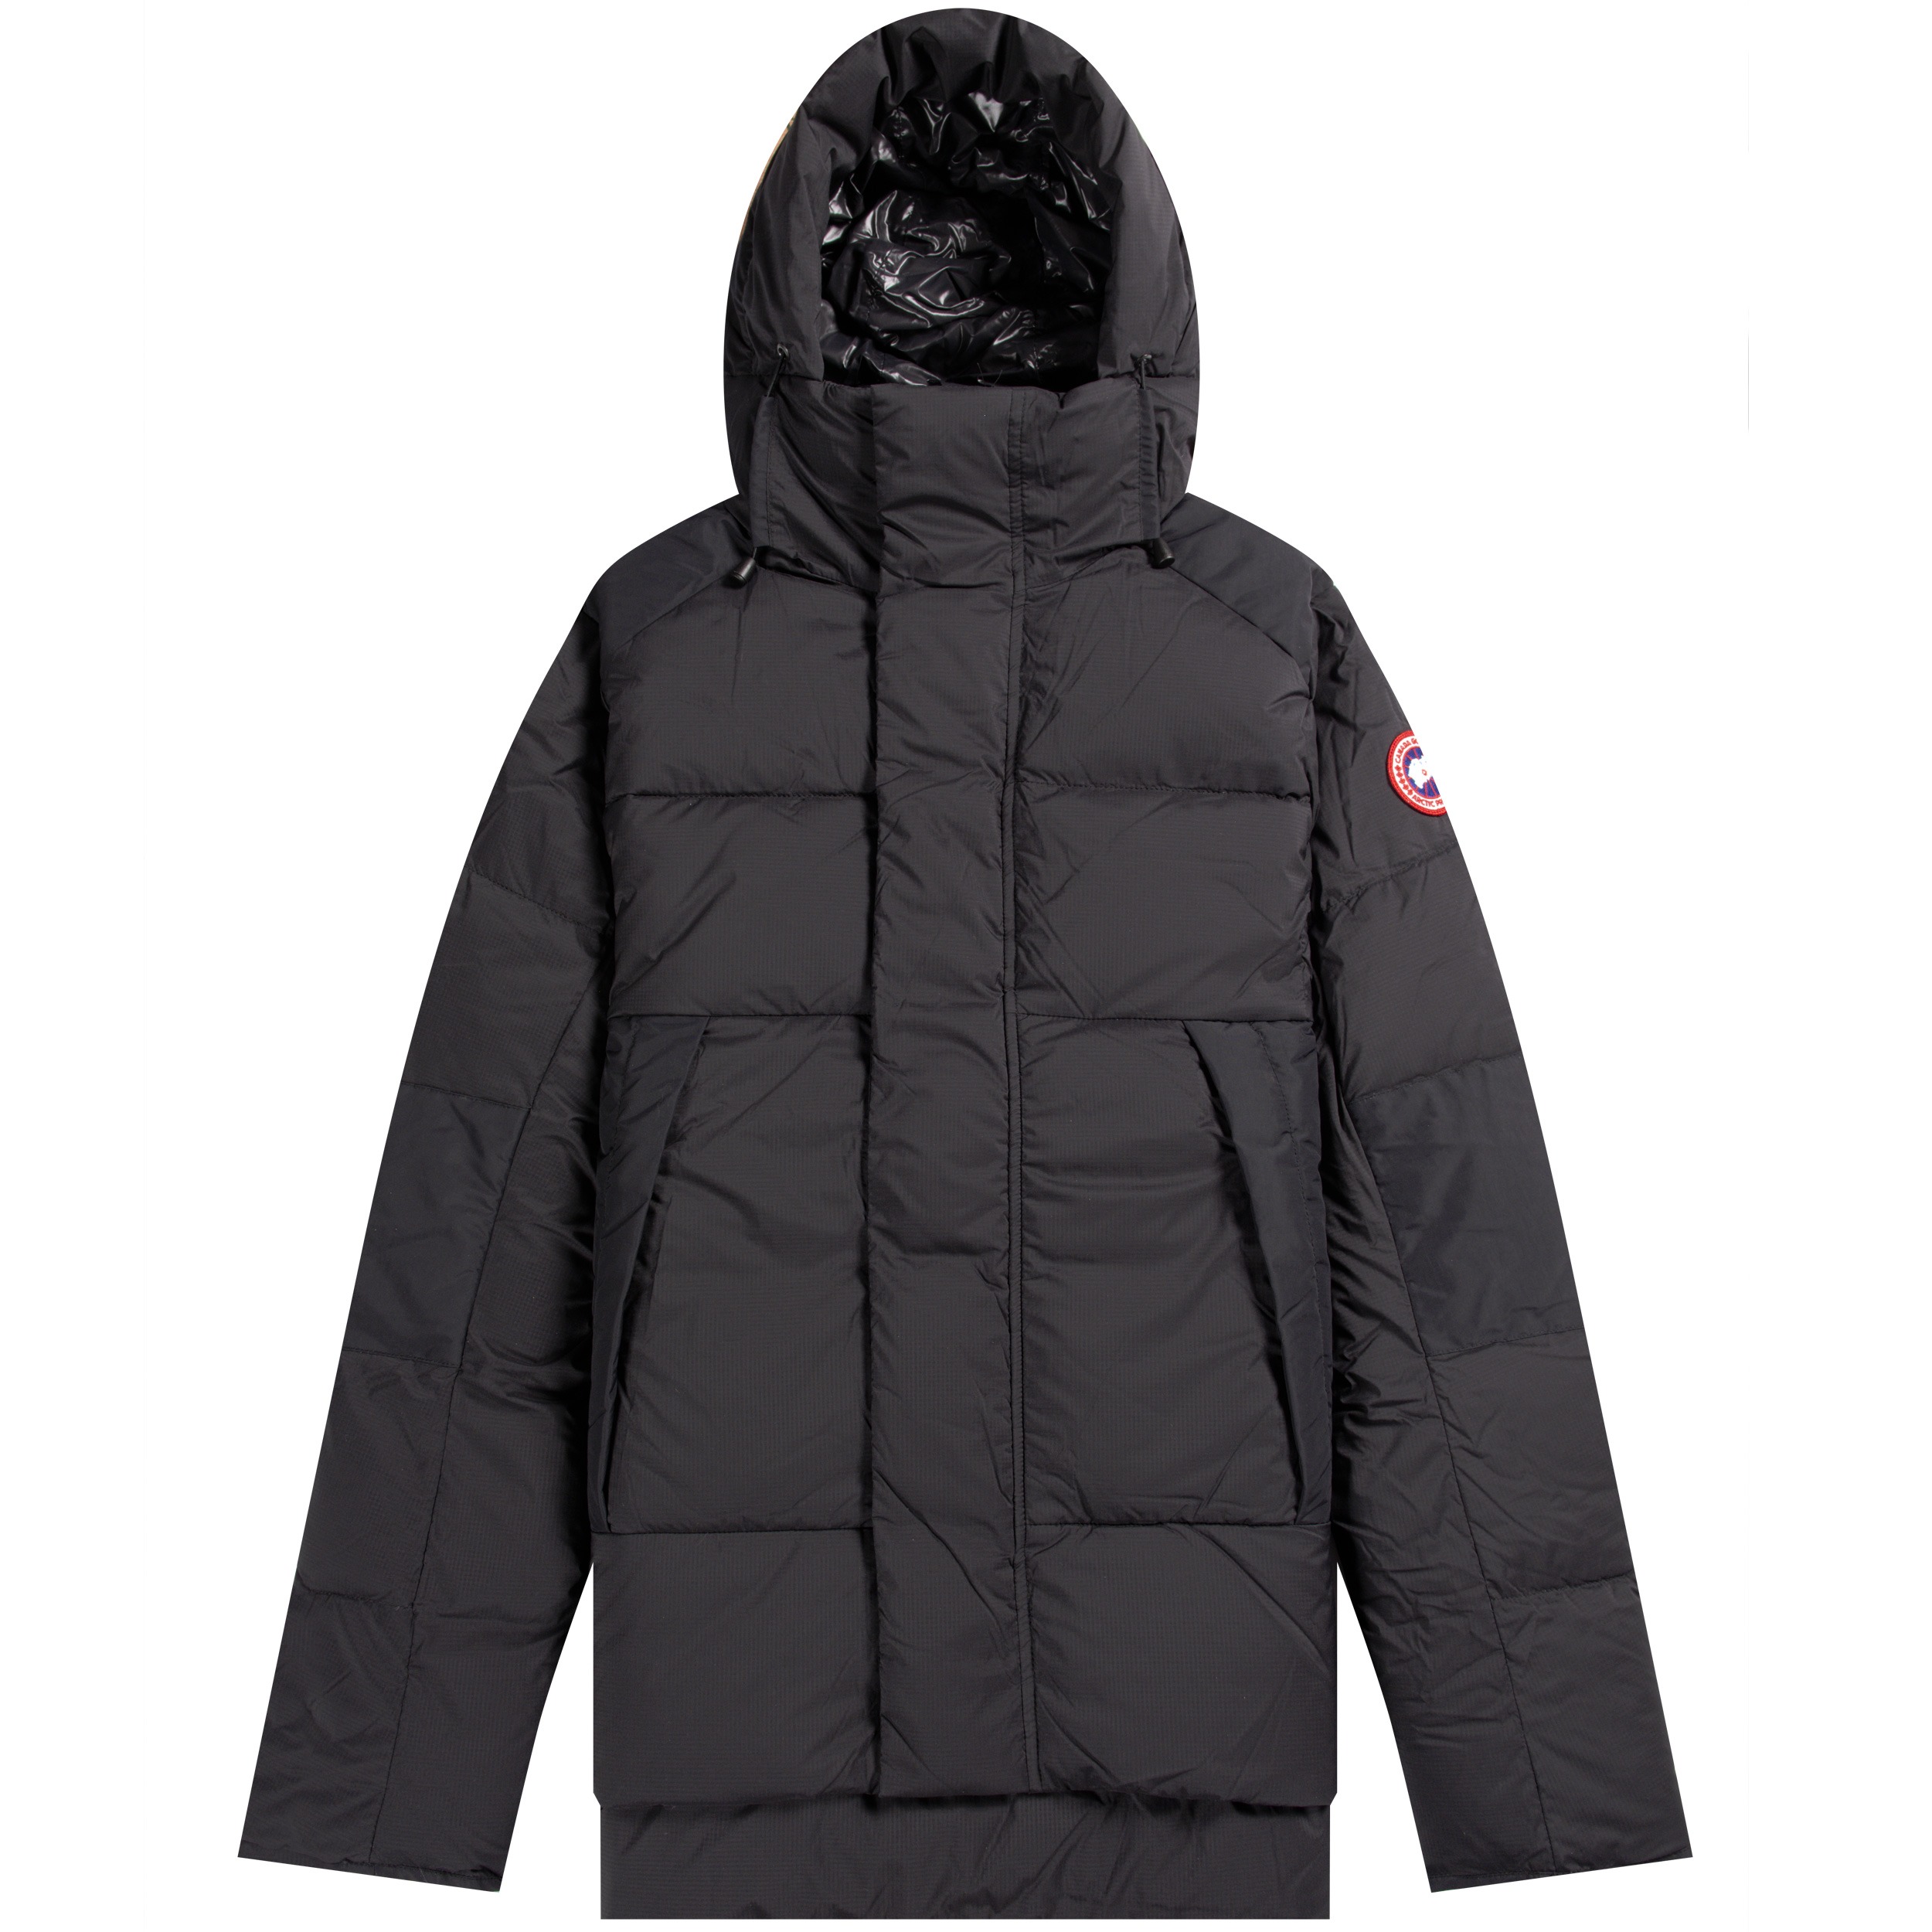 Canada Goose 'Armstrong' Hooded Jacket Black